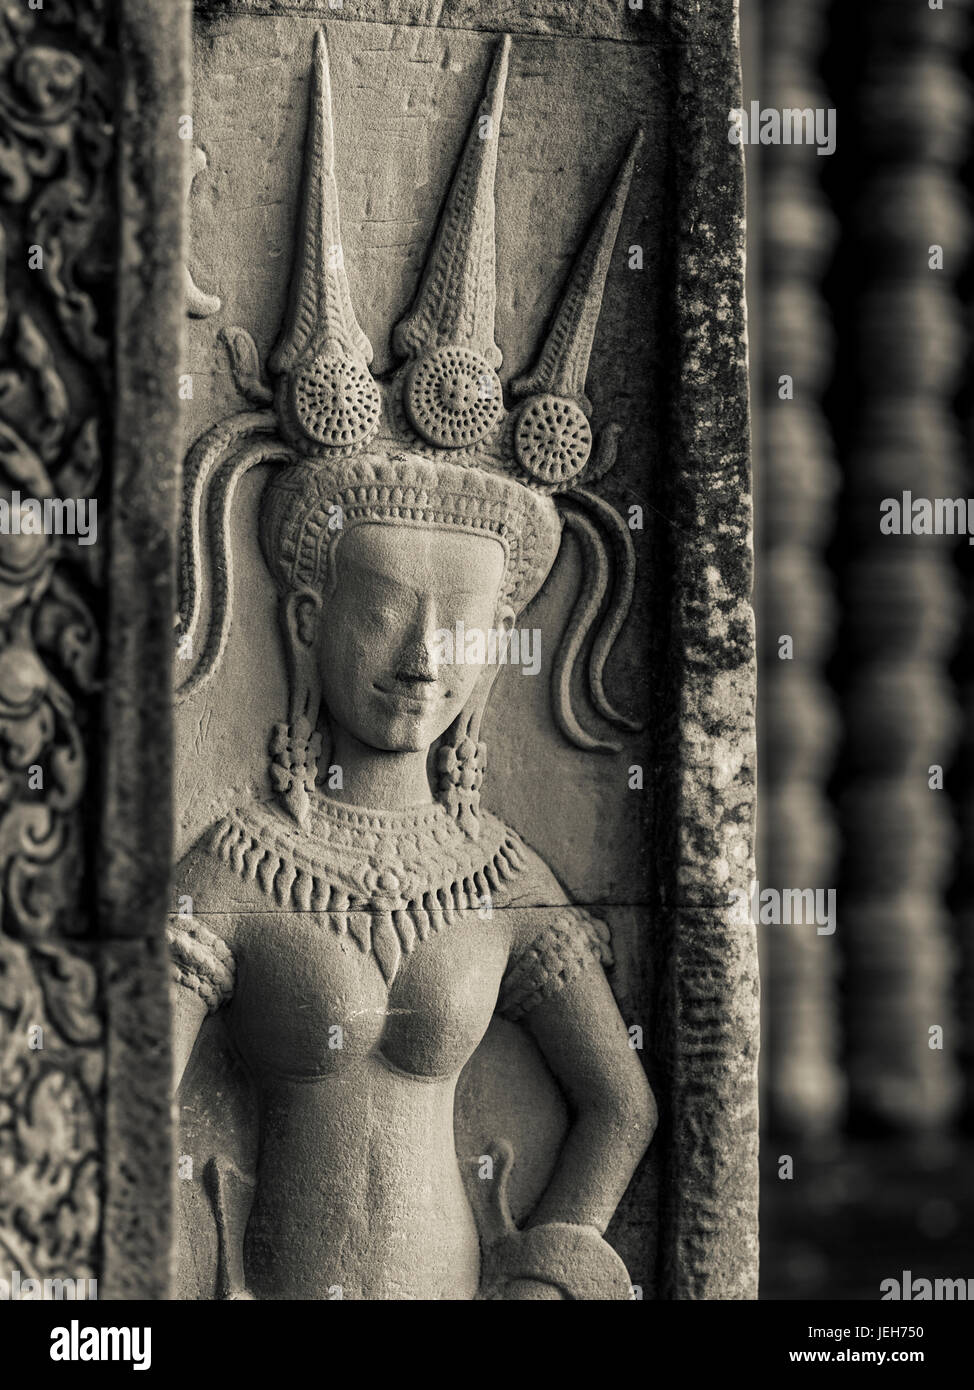 Buddhist figure carved in stone at a buddhist temple; Angkor Wat; Krong Siem Reap, Siem Reap Province, Cambodia Stock Photo